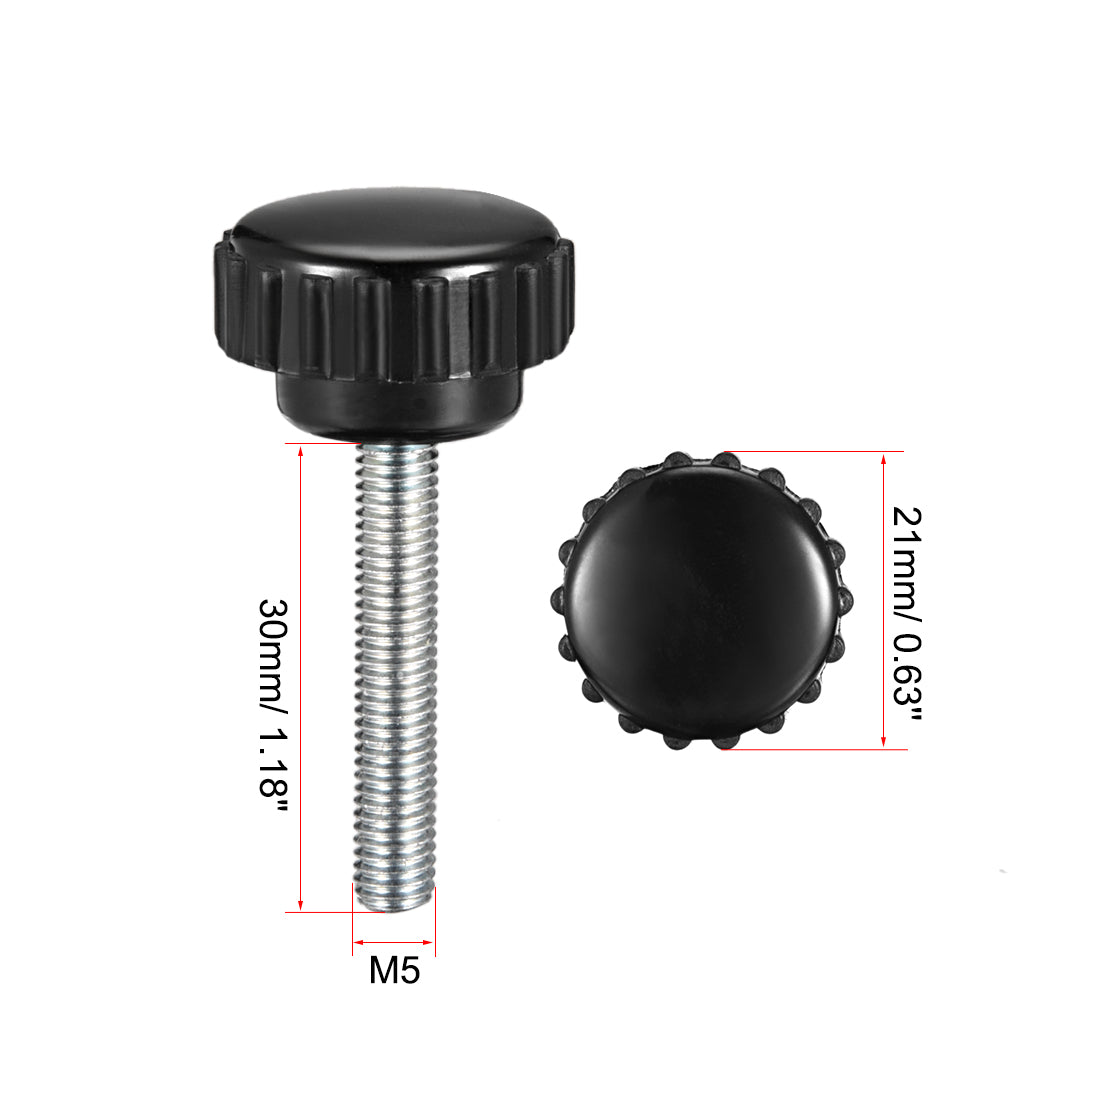 Uxcell Uxcell M4 x 16mm Male Thread Knurled Clamping Knobs Grip Thumb Screw on Type 8 Pcs